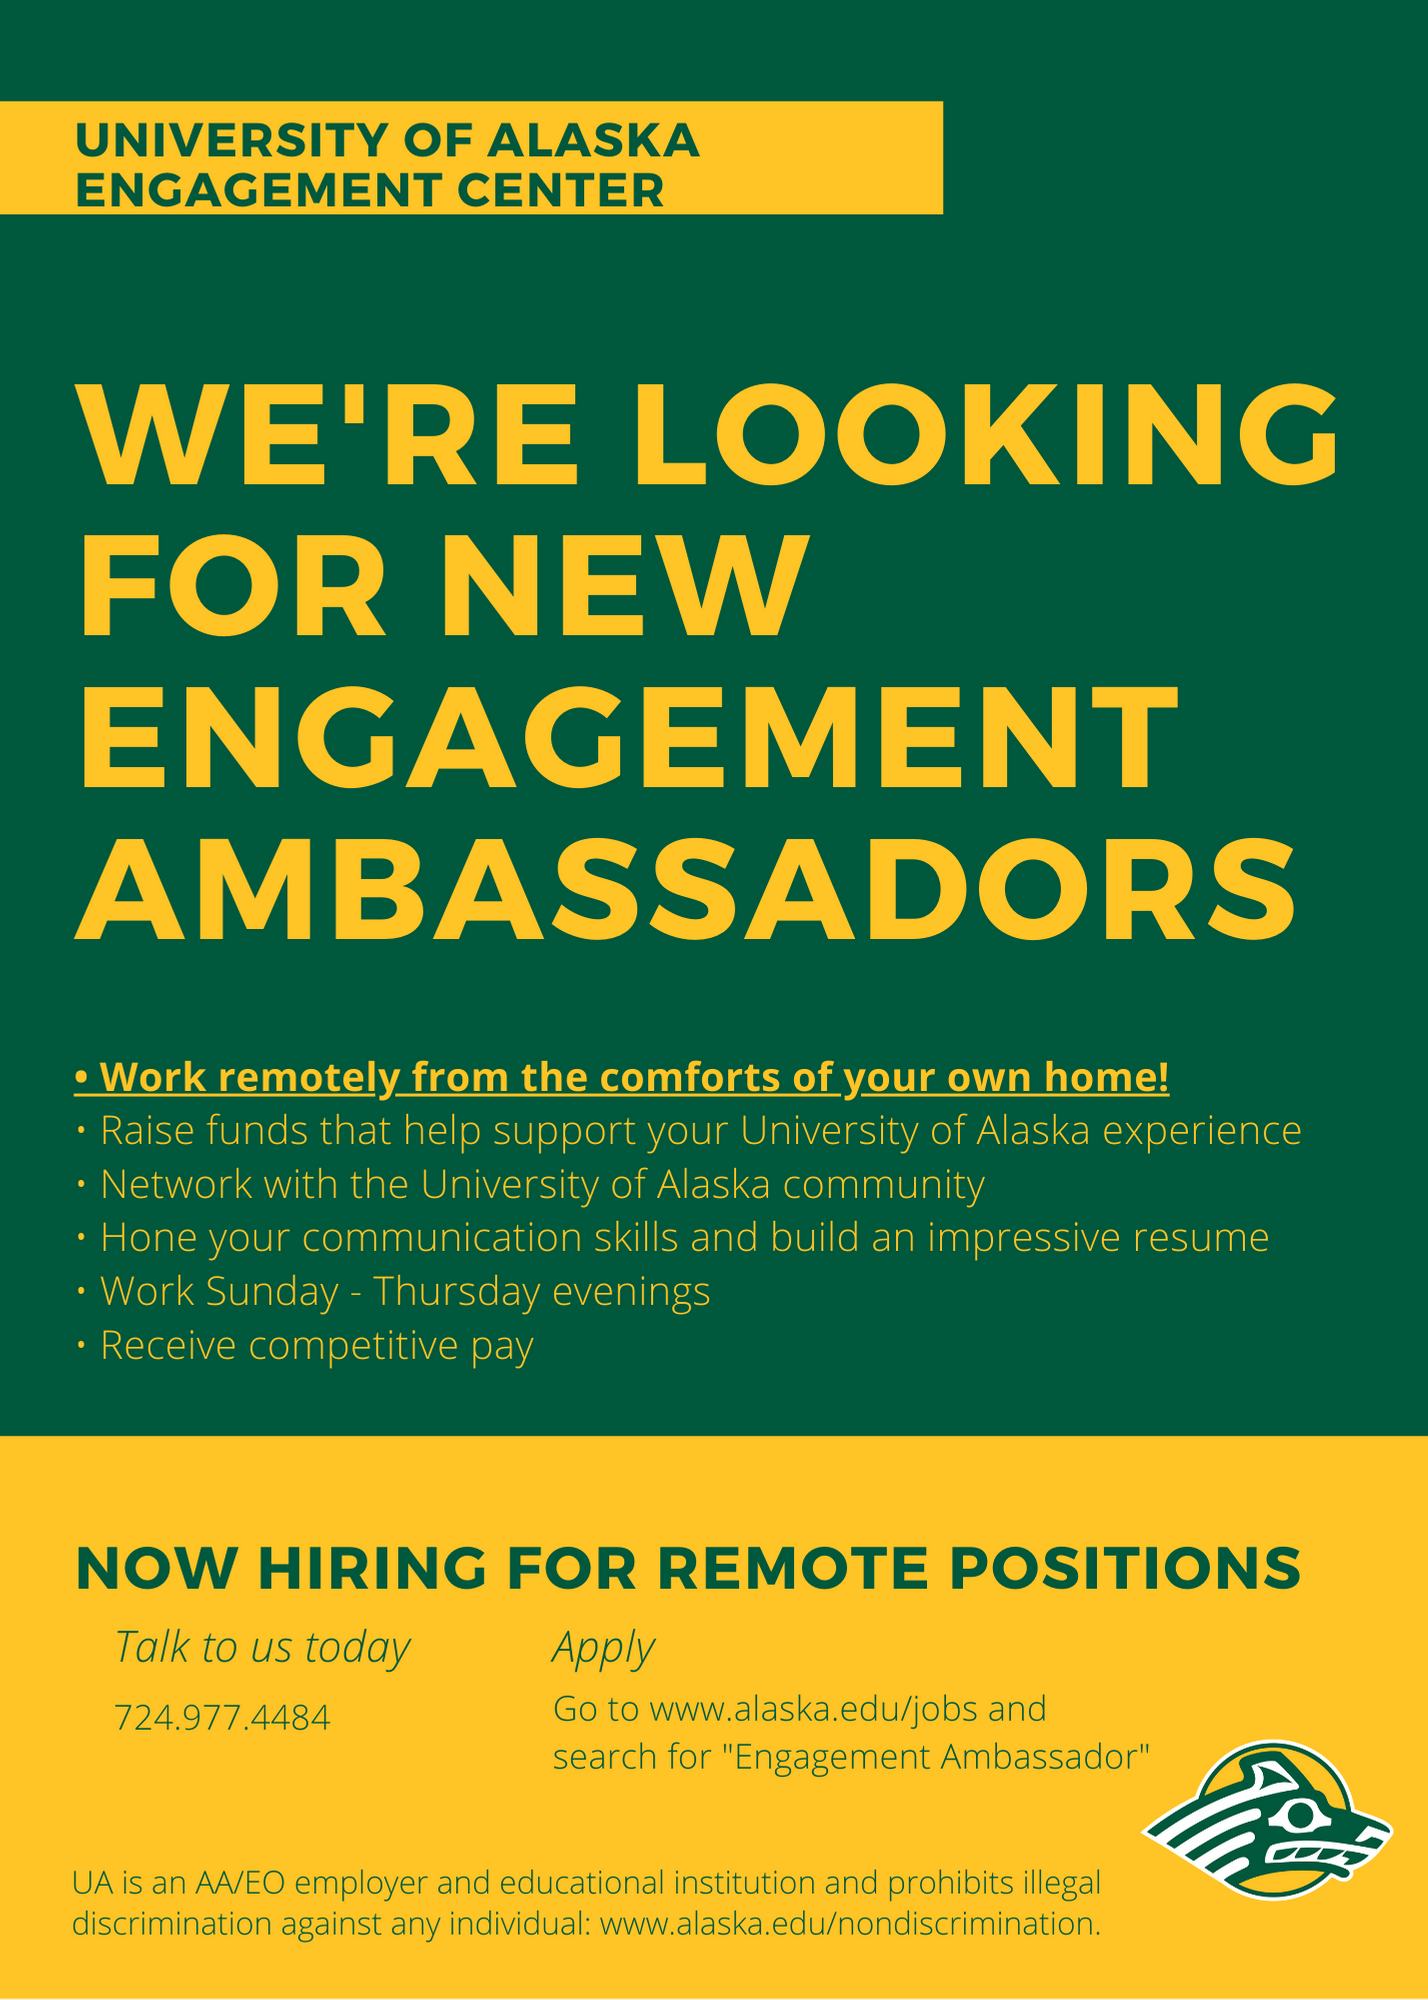 UAA Engagement Center is now hiring for remote positions. Talk to us today by phone at 724-977-4484. Learn more and apply online: go to alaska dot E D U forward slash jobs and search for “Engagement Ambassador.”